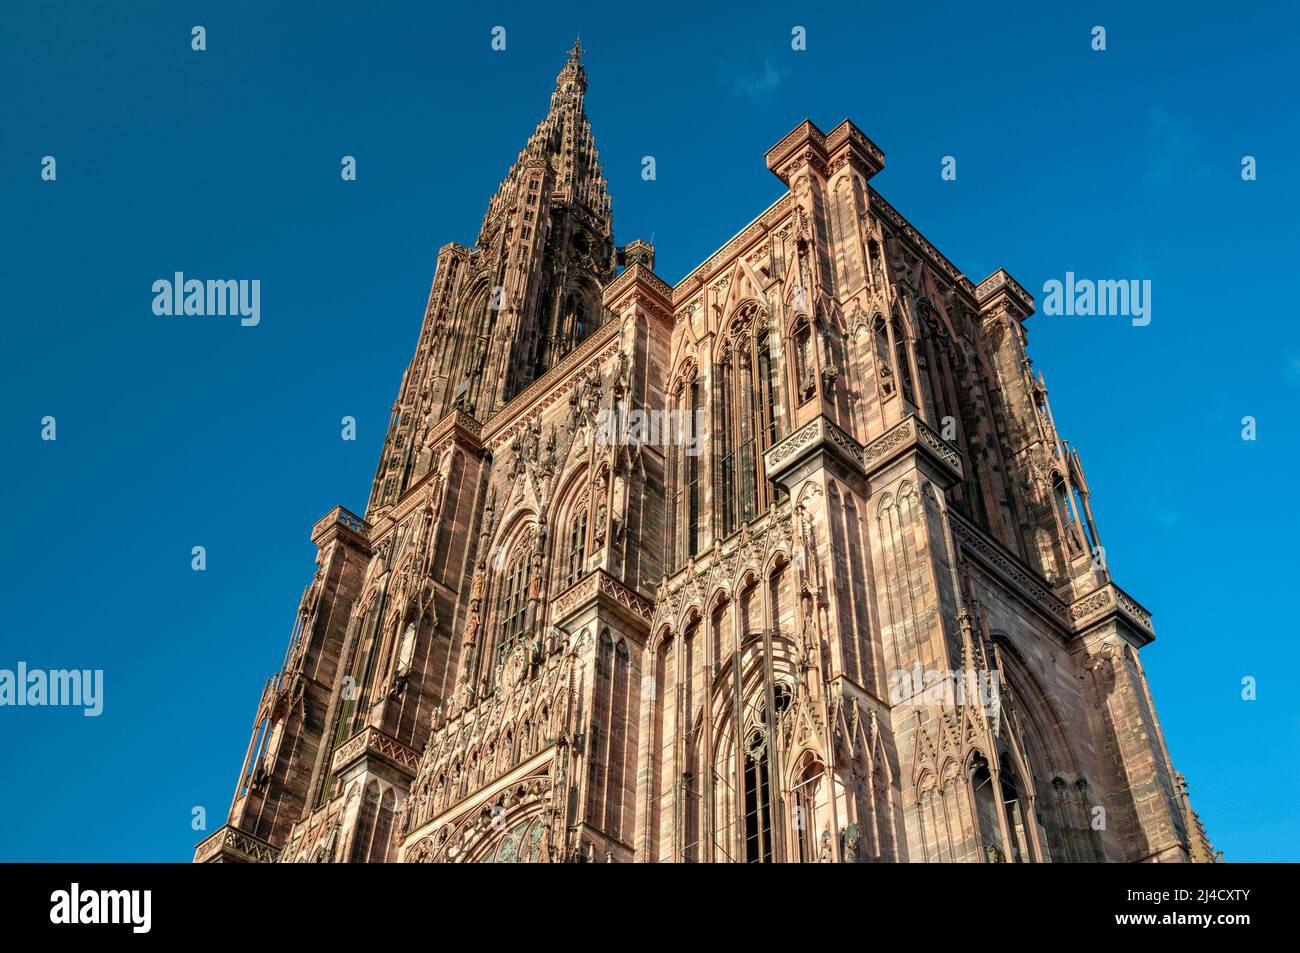 Facade of Notre-Dame de Strasbourg cathedral in the old town, Unesco World Heritage Site, Strasbourg, Bas-Rhin (67), Grand Est region, France Stock Photo